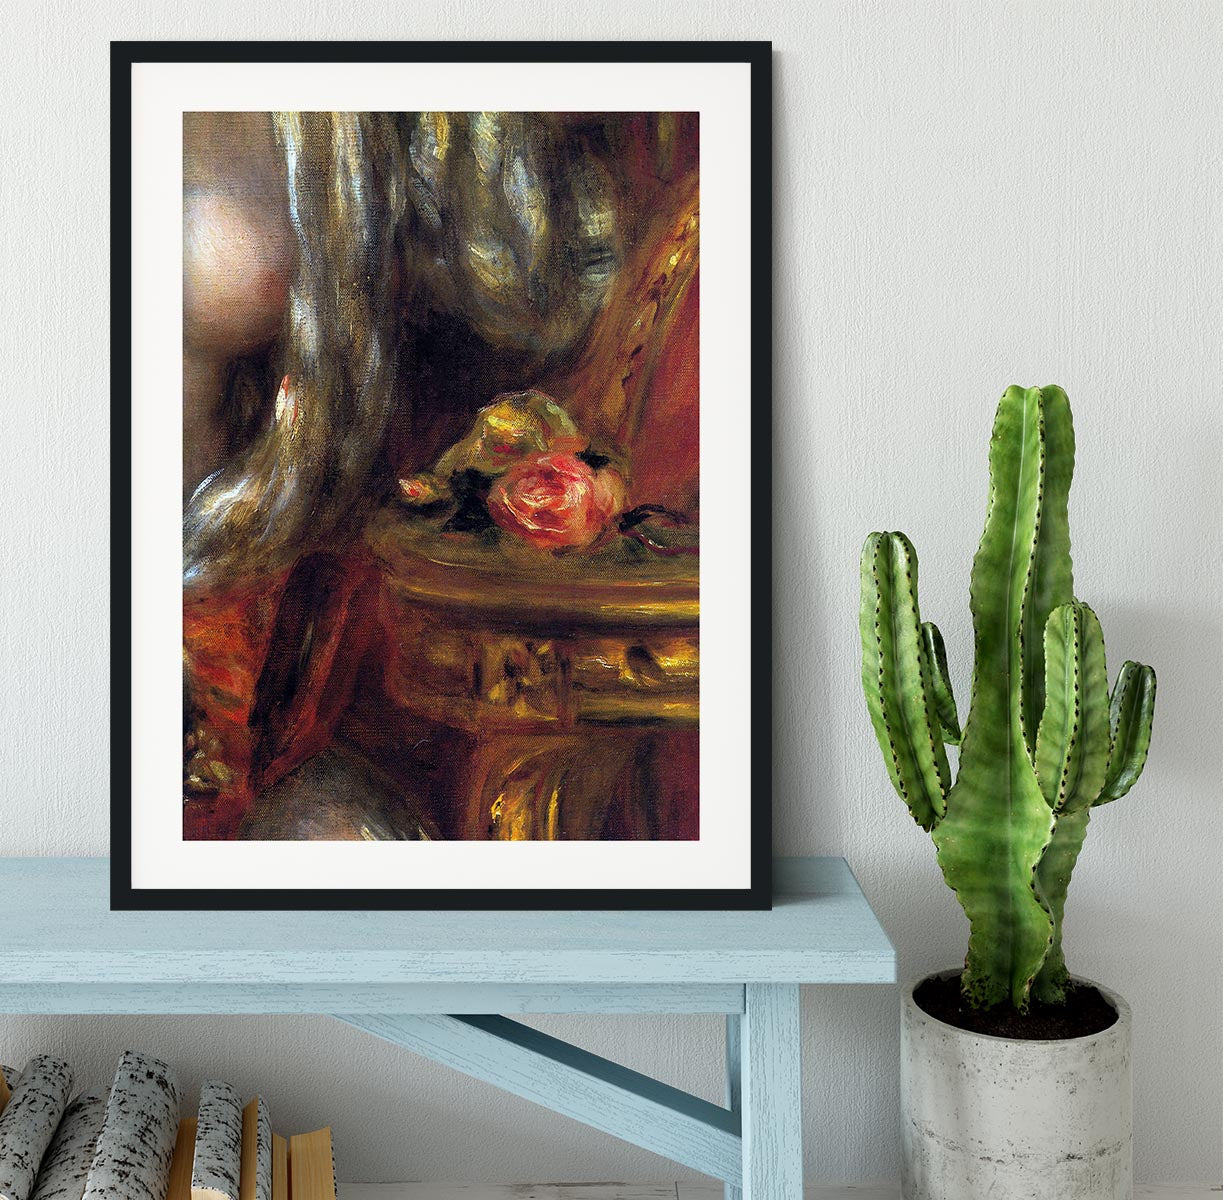 Gabrielle with jewels detail by Renoir Framed Print - Canvas Art Rocks - 1